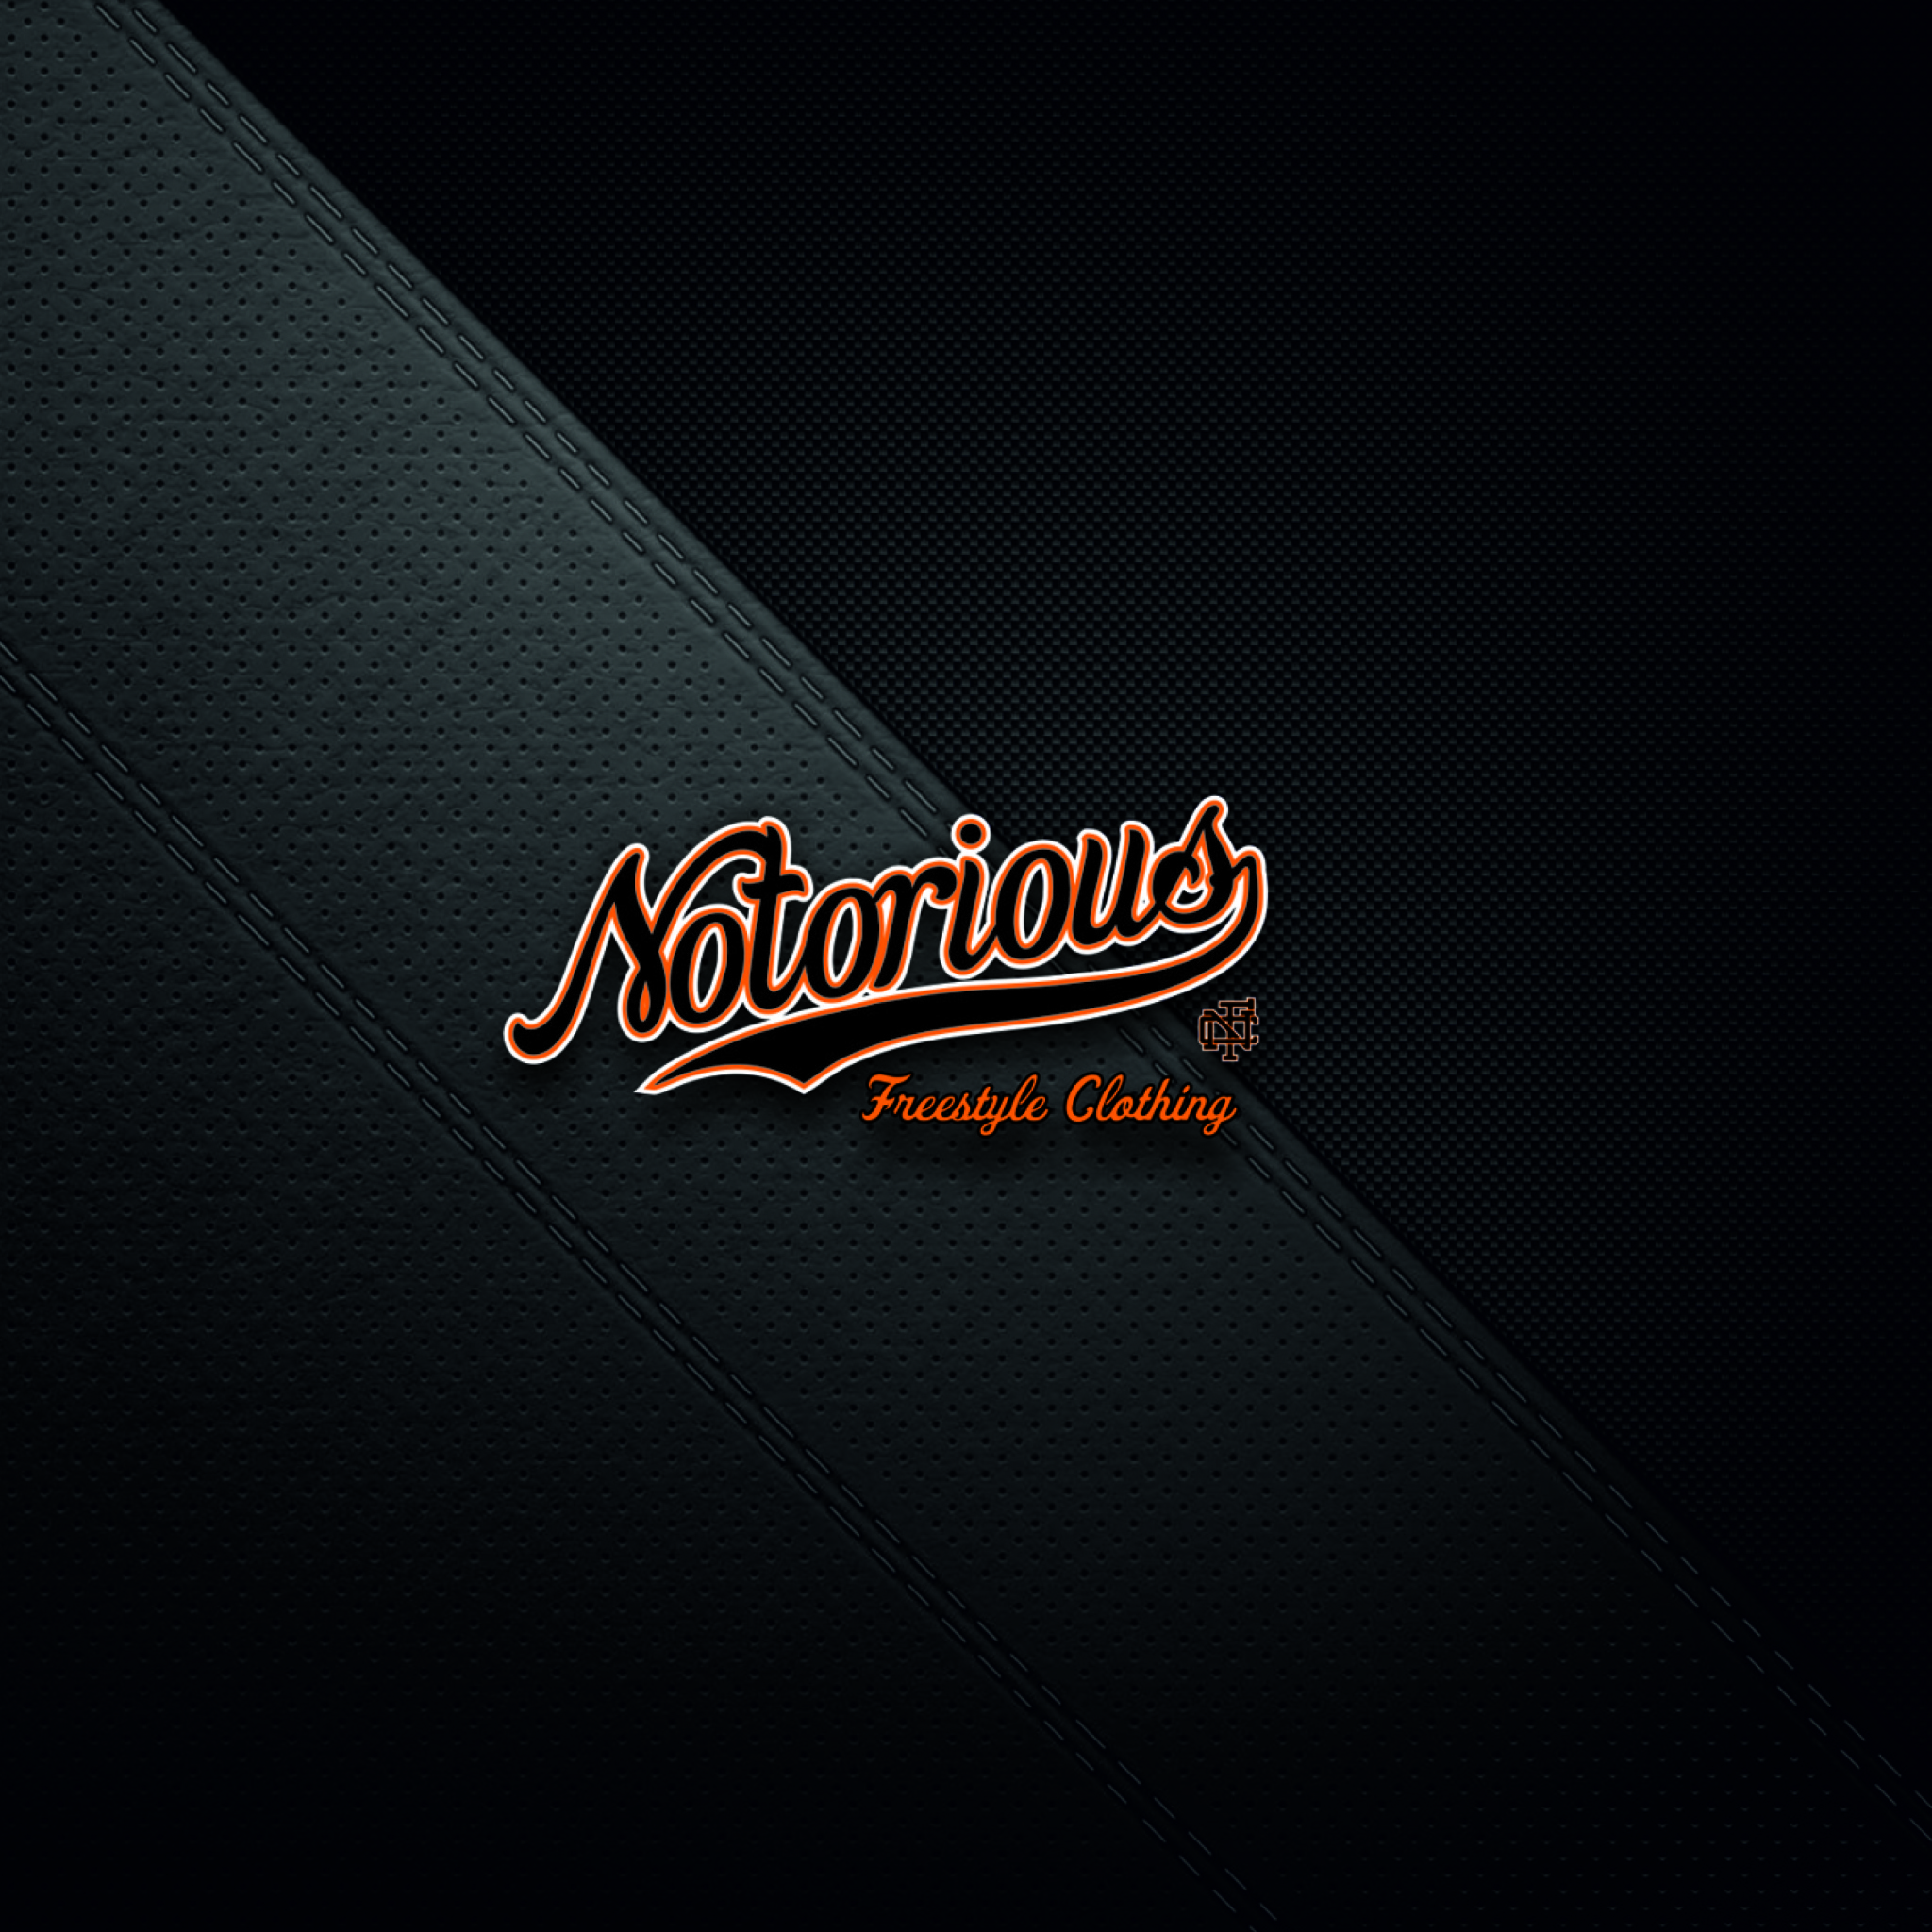 Notorious Freestyle Clothes wallpaper 2048x2048